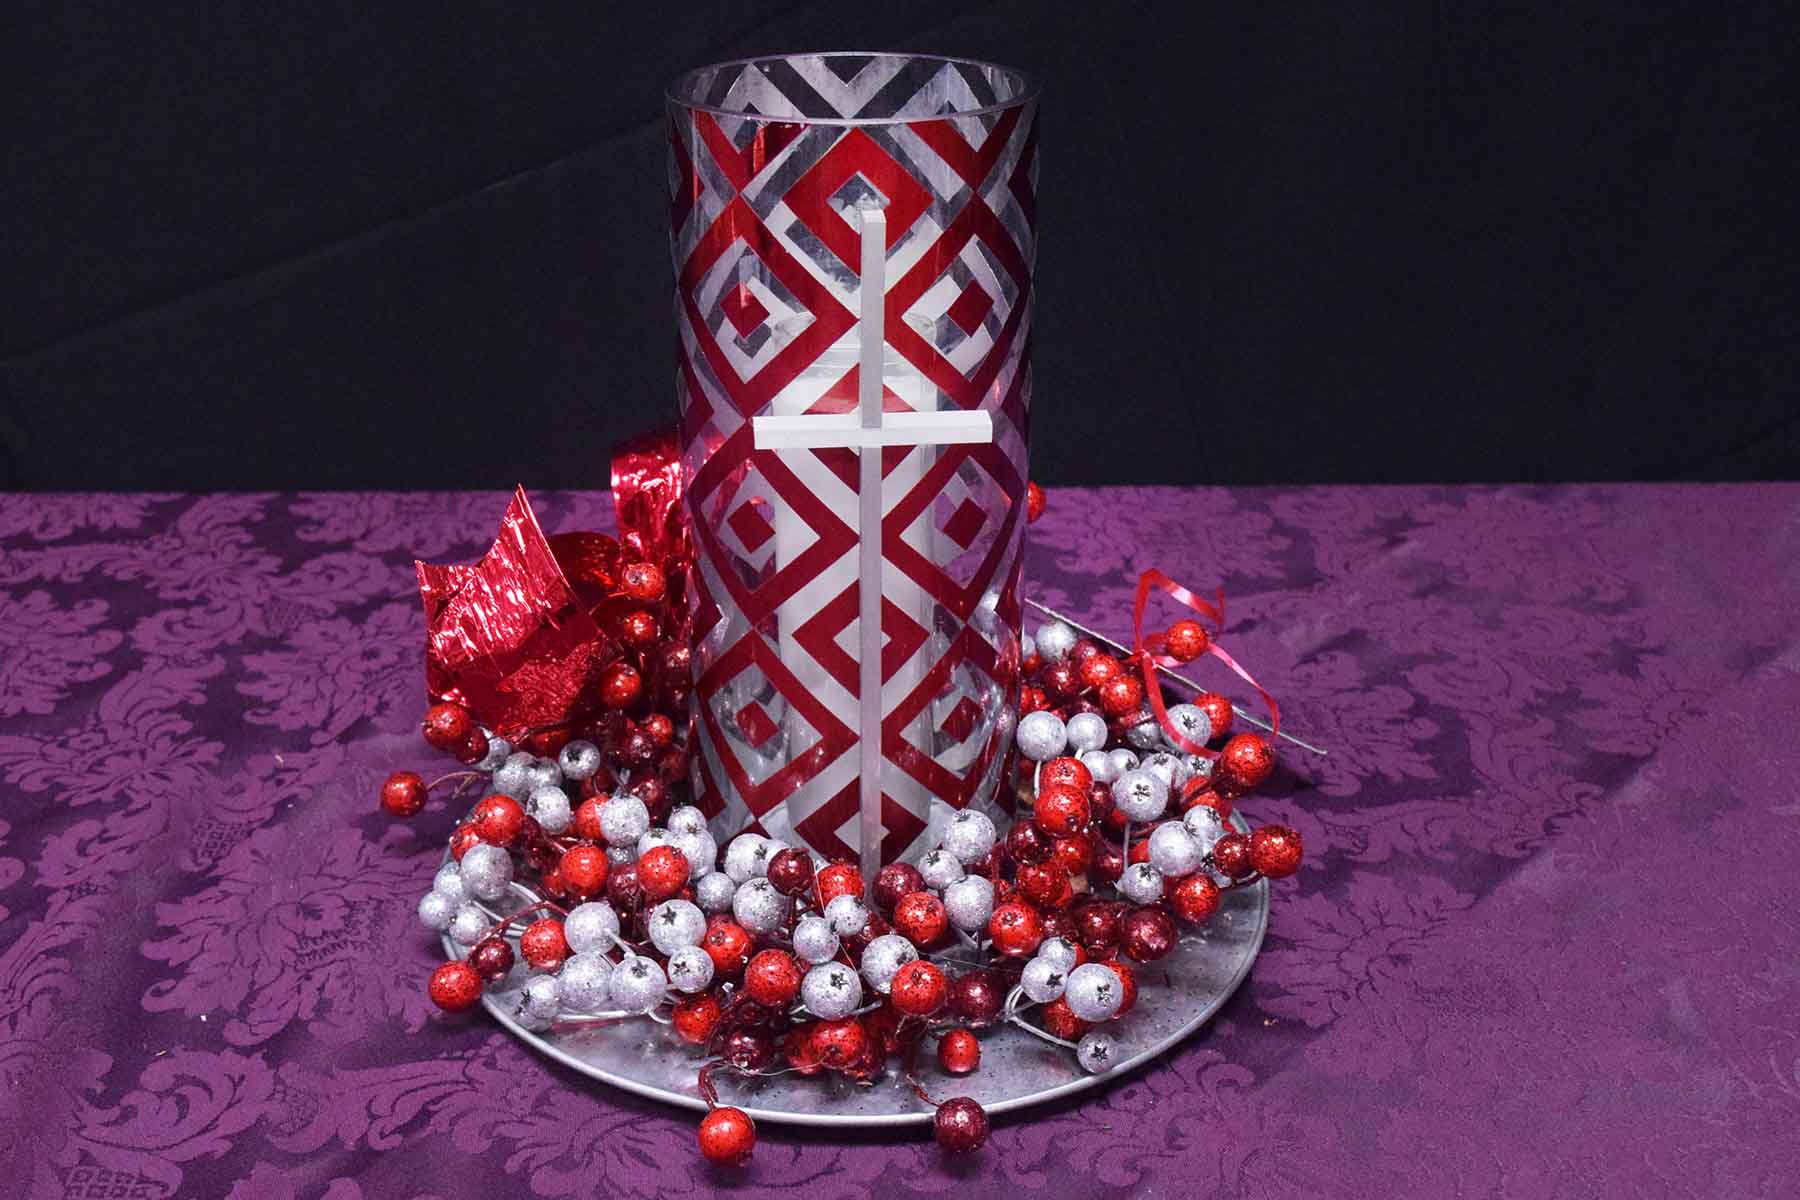 C4_--_Red_silver_with_candle_and_cross.jpg